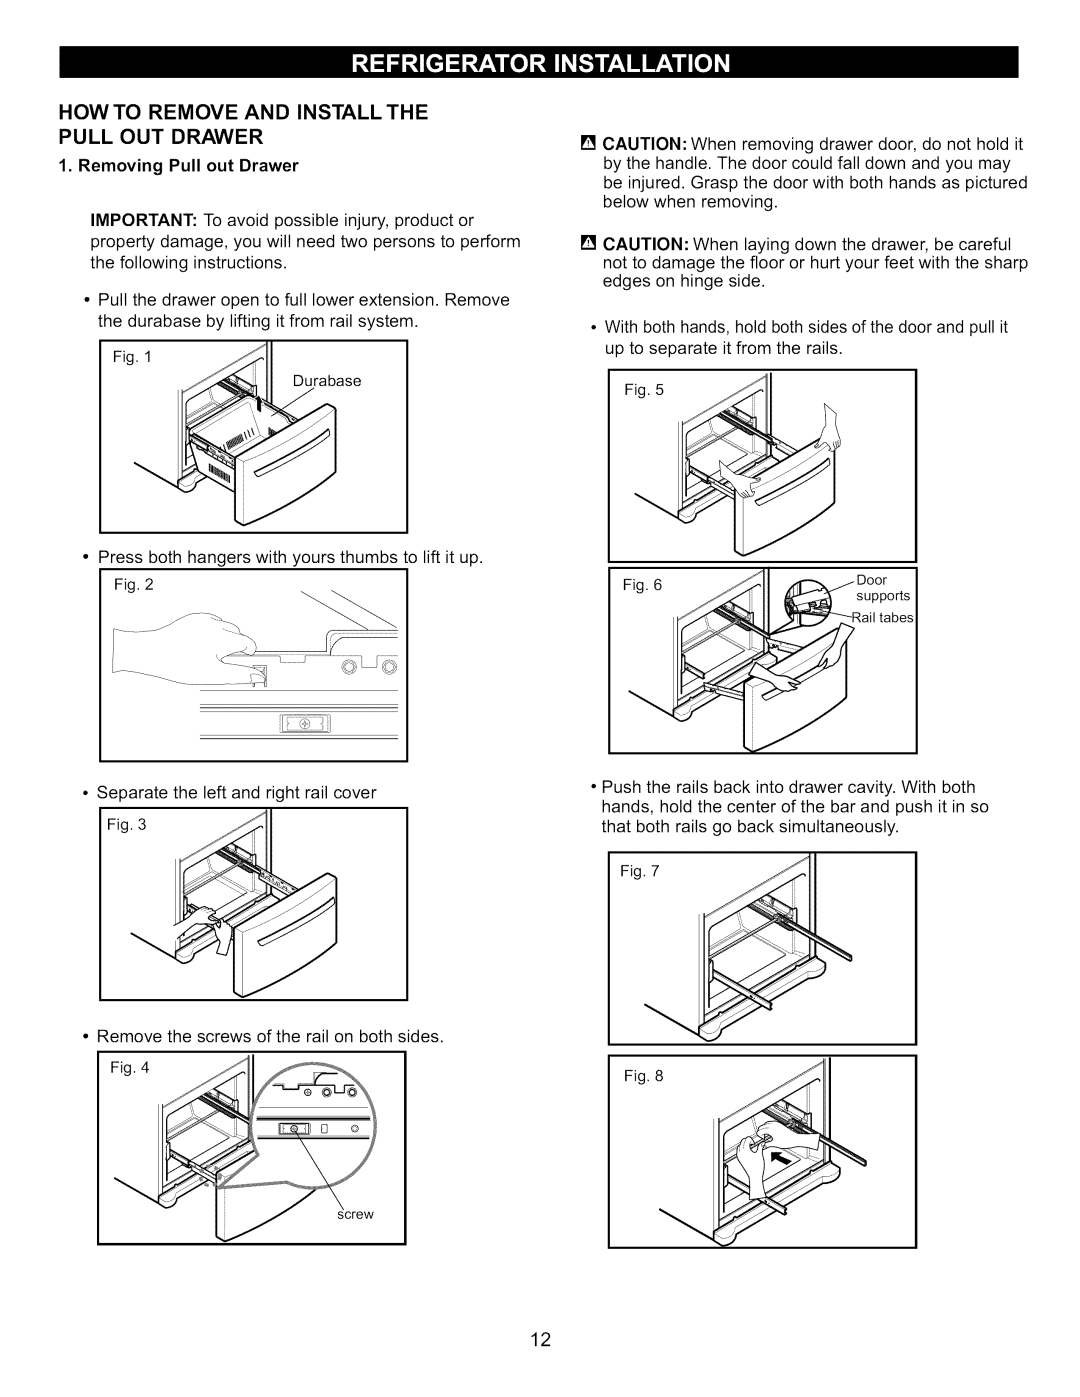 Kenmore 795.7130-K manual How To Remove And Install The Pull Out Drawer, Removing Pull out Drawer 